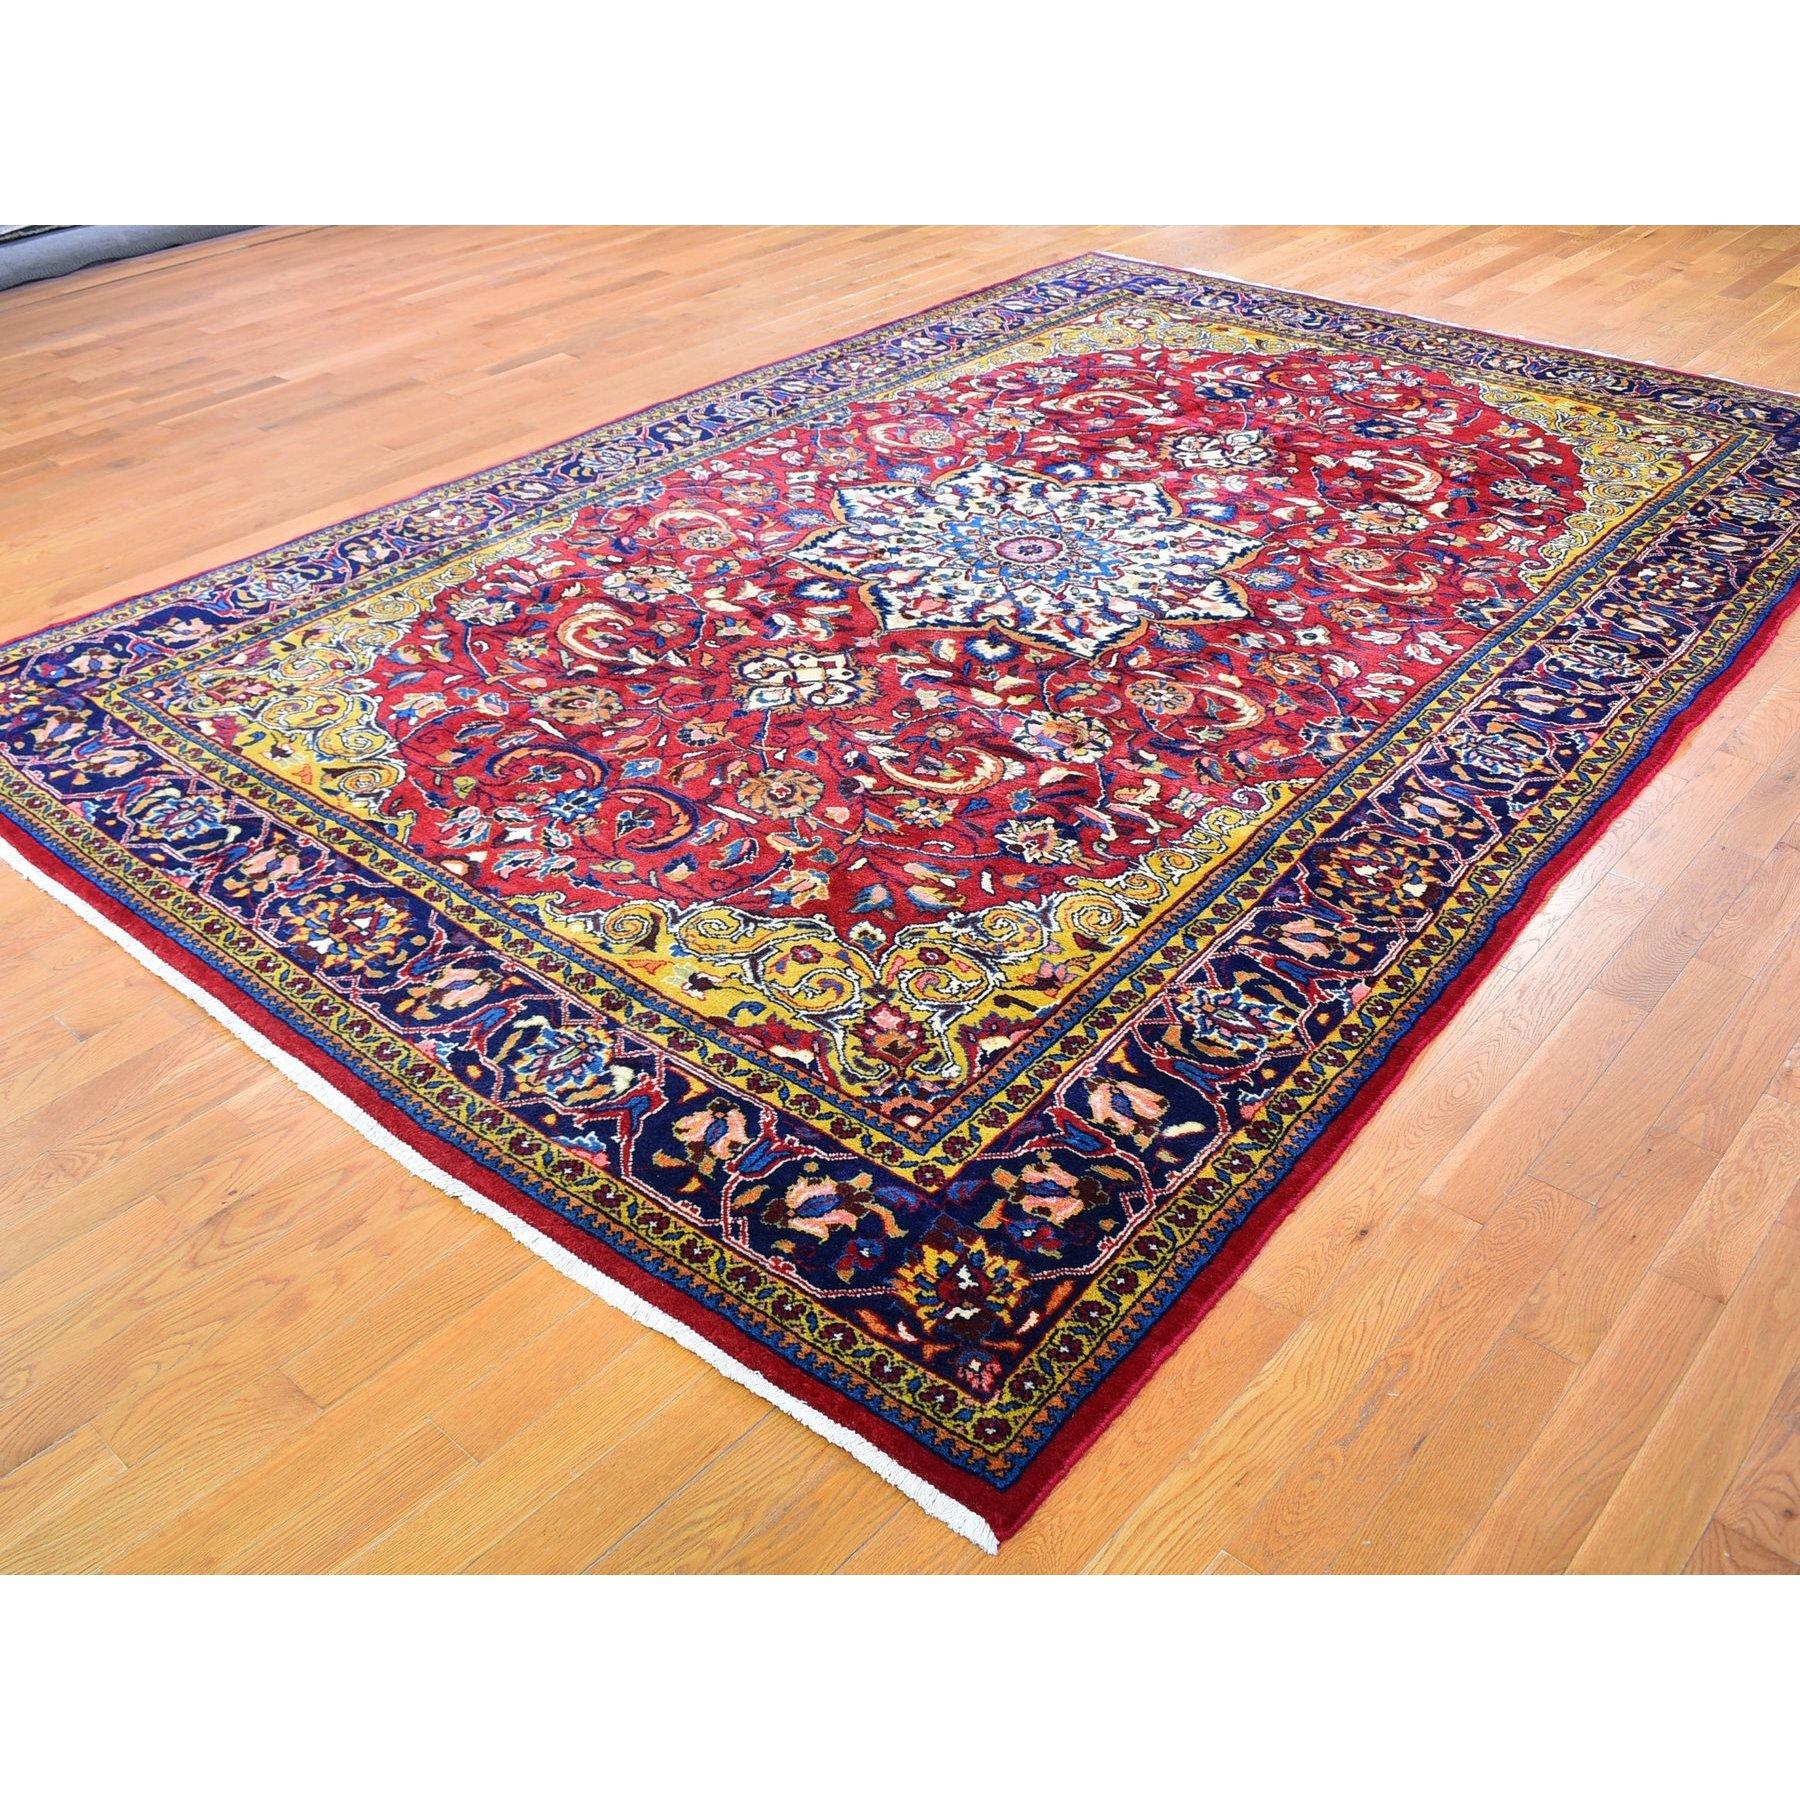 Hand-Knotted Semi Antique Persian Mahal with Yellow Corners Natural Wool Oriental Rug